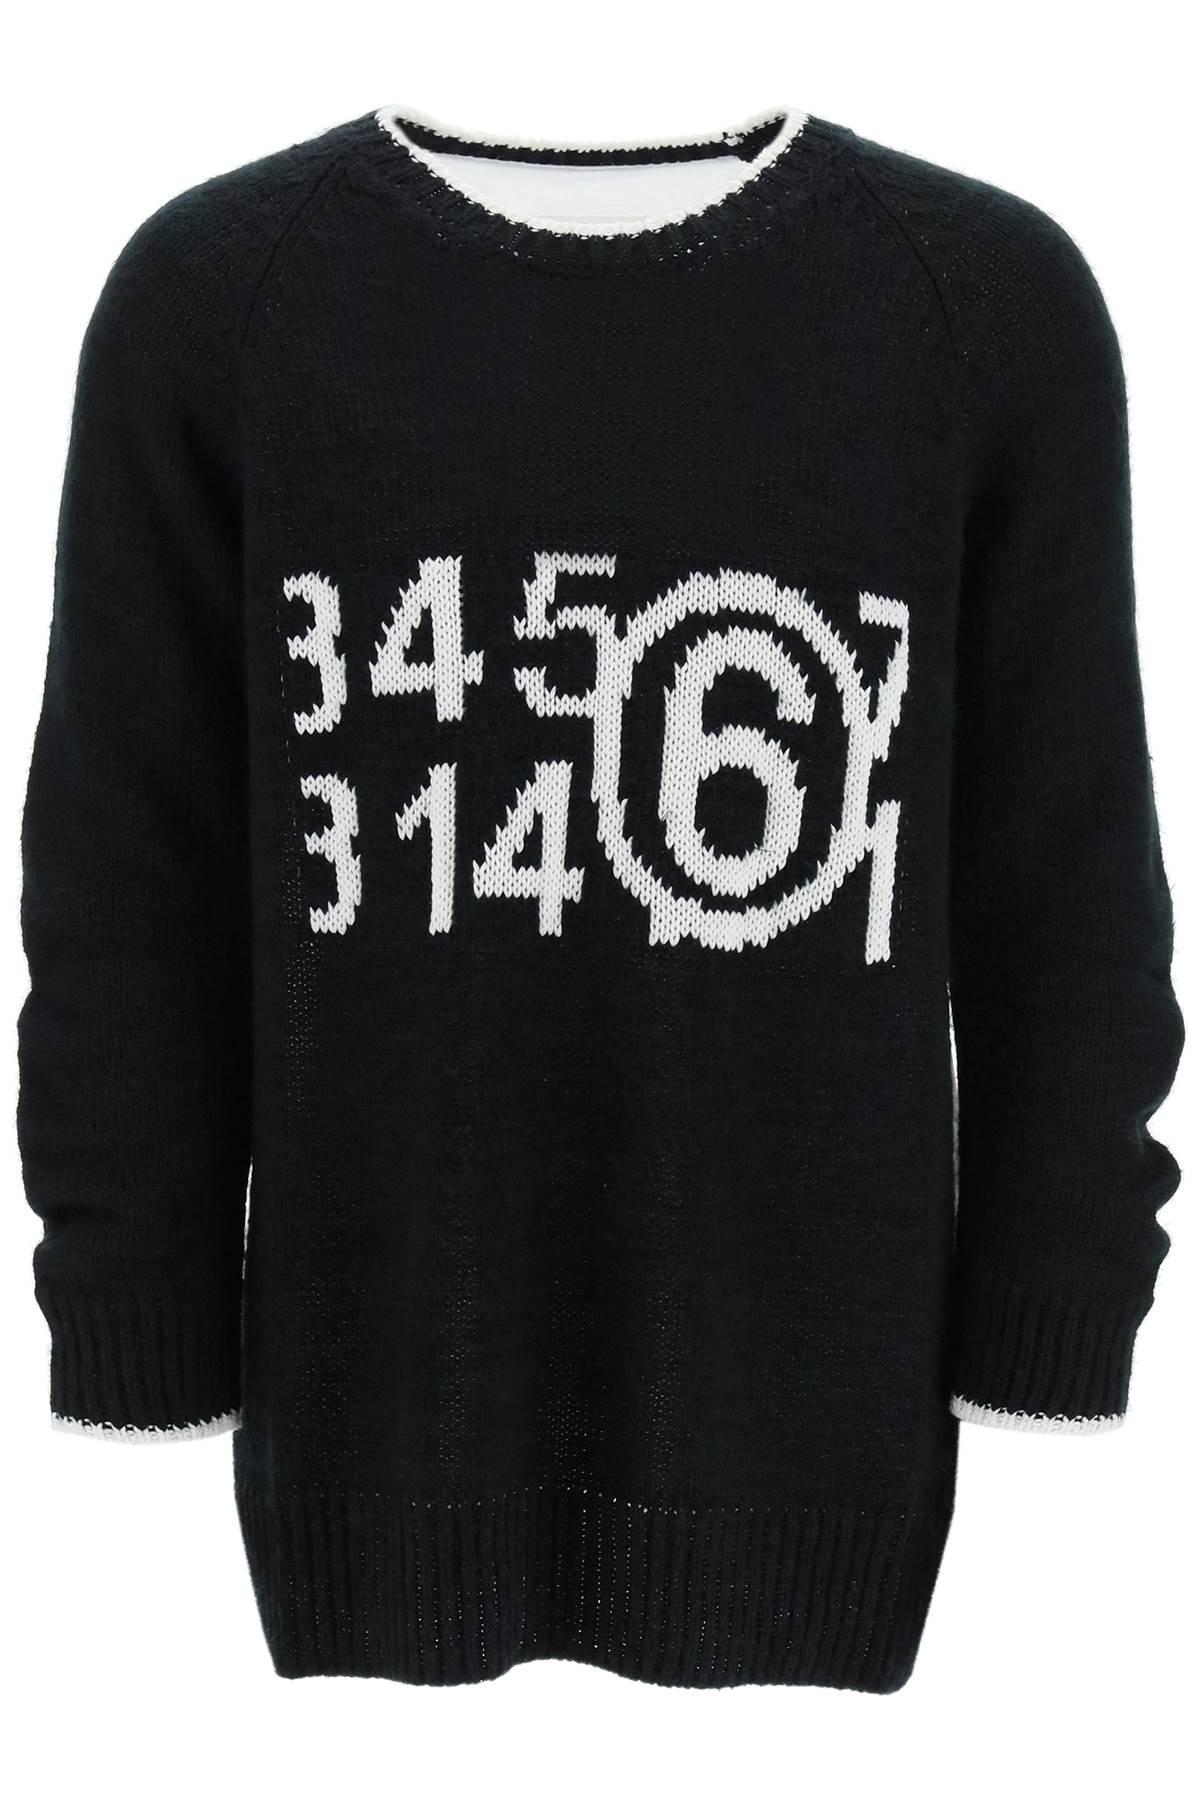 MM6 MAISON MARGIELA LOGO SWEATER IN COTTON KNIT AND JERSEY